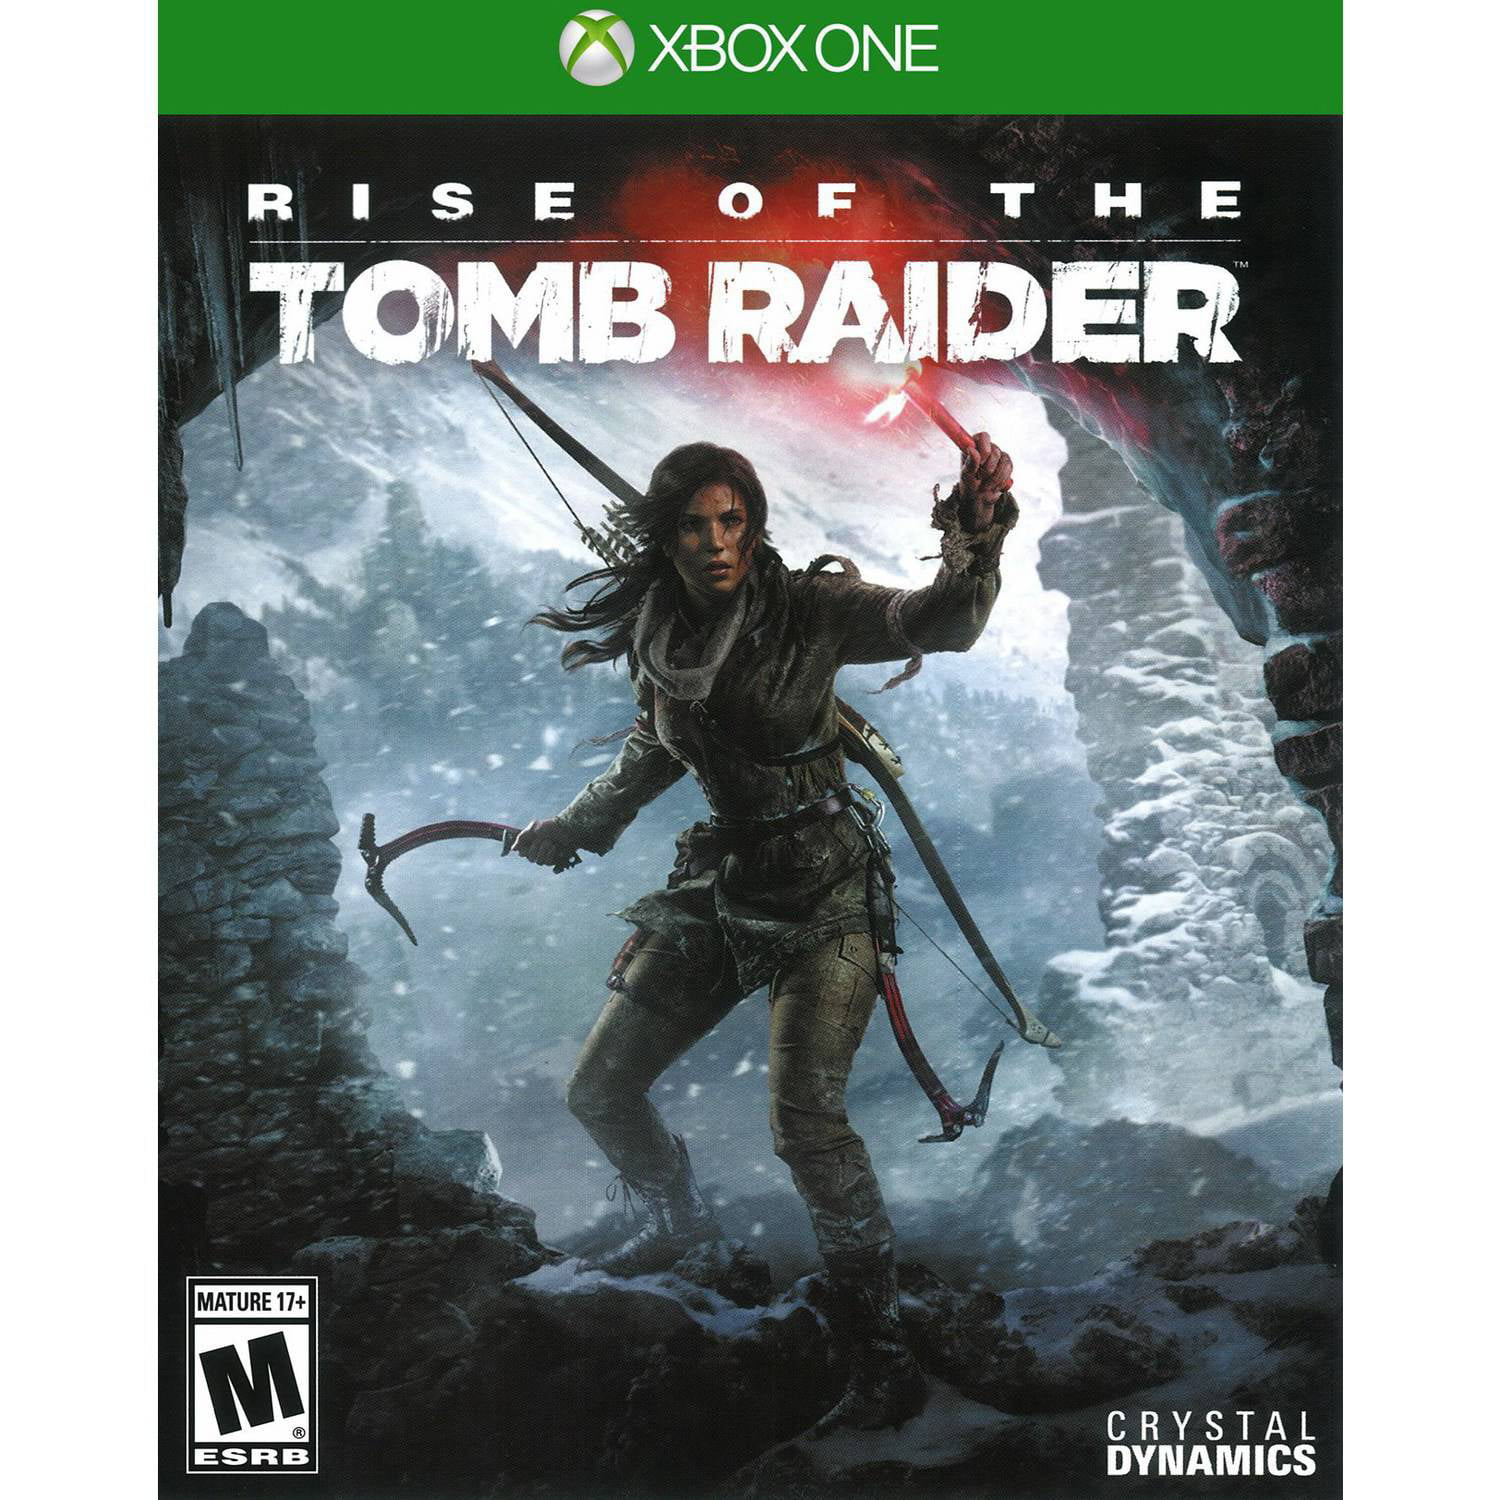 Rise of the Tomb Raider review | GamesRadar+